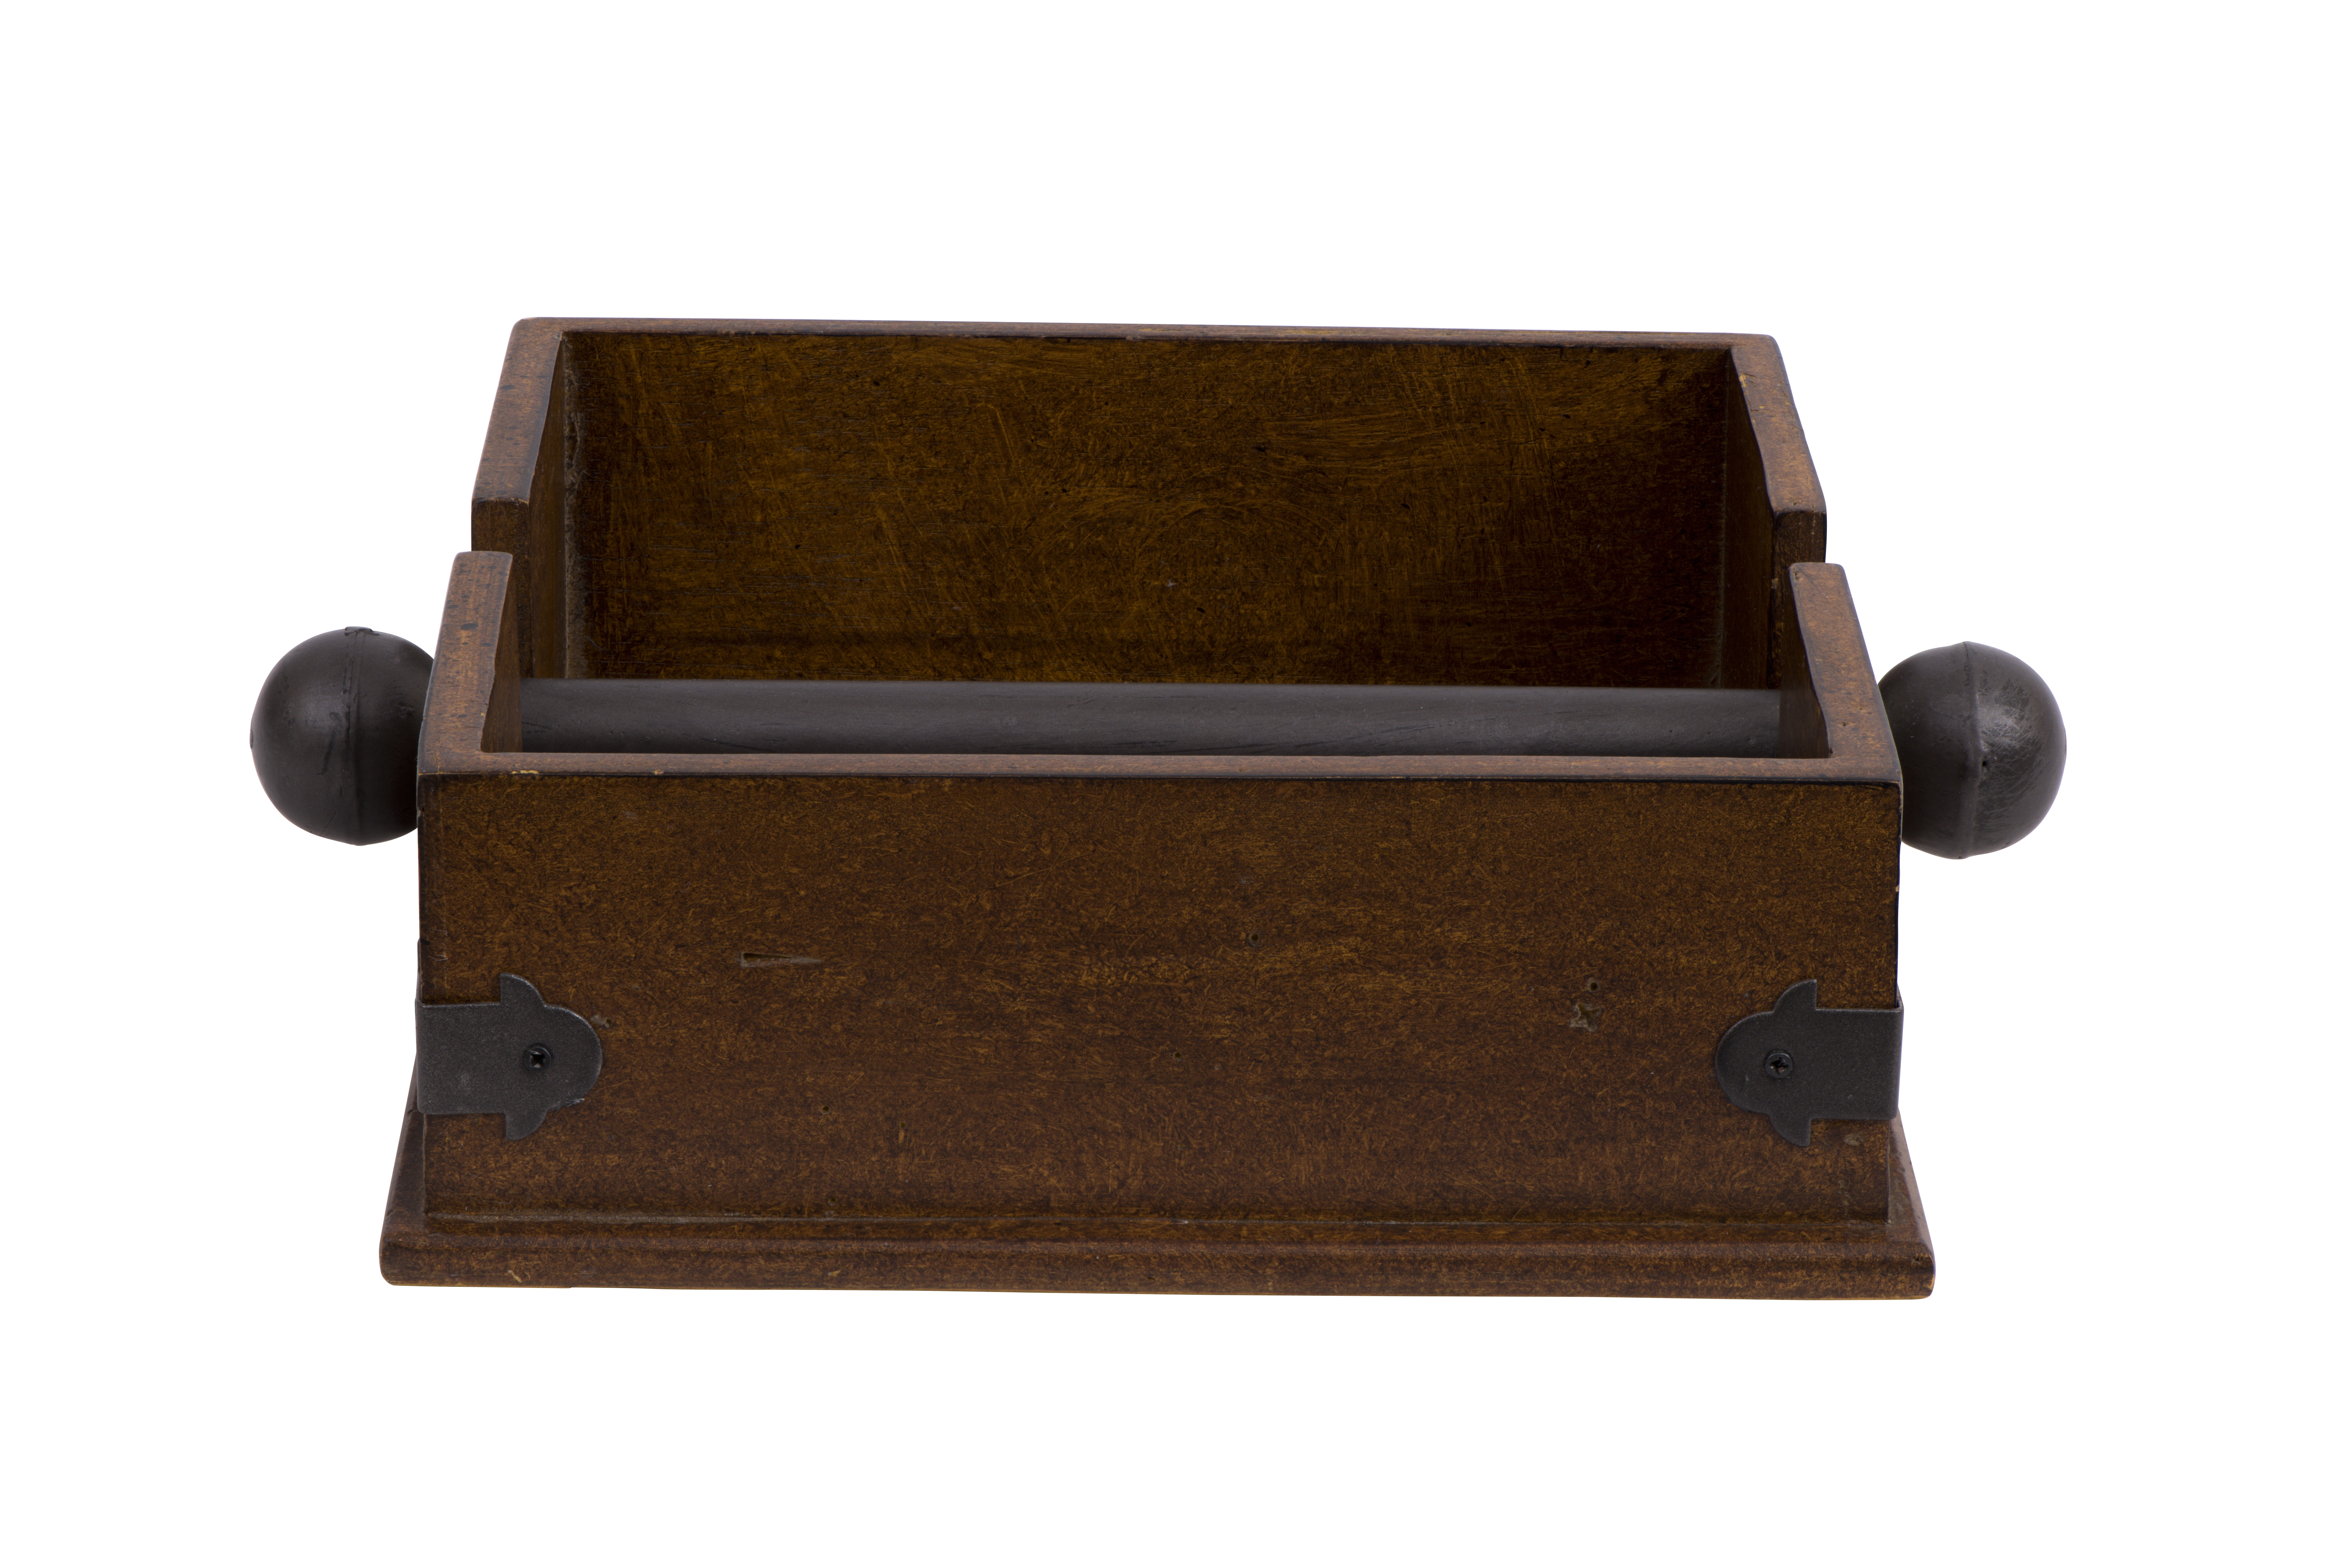 Square Wood Napkin Holder with Metal Bar - Nomad Home